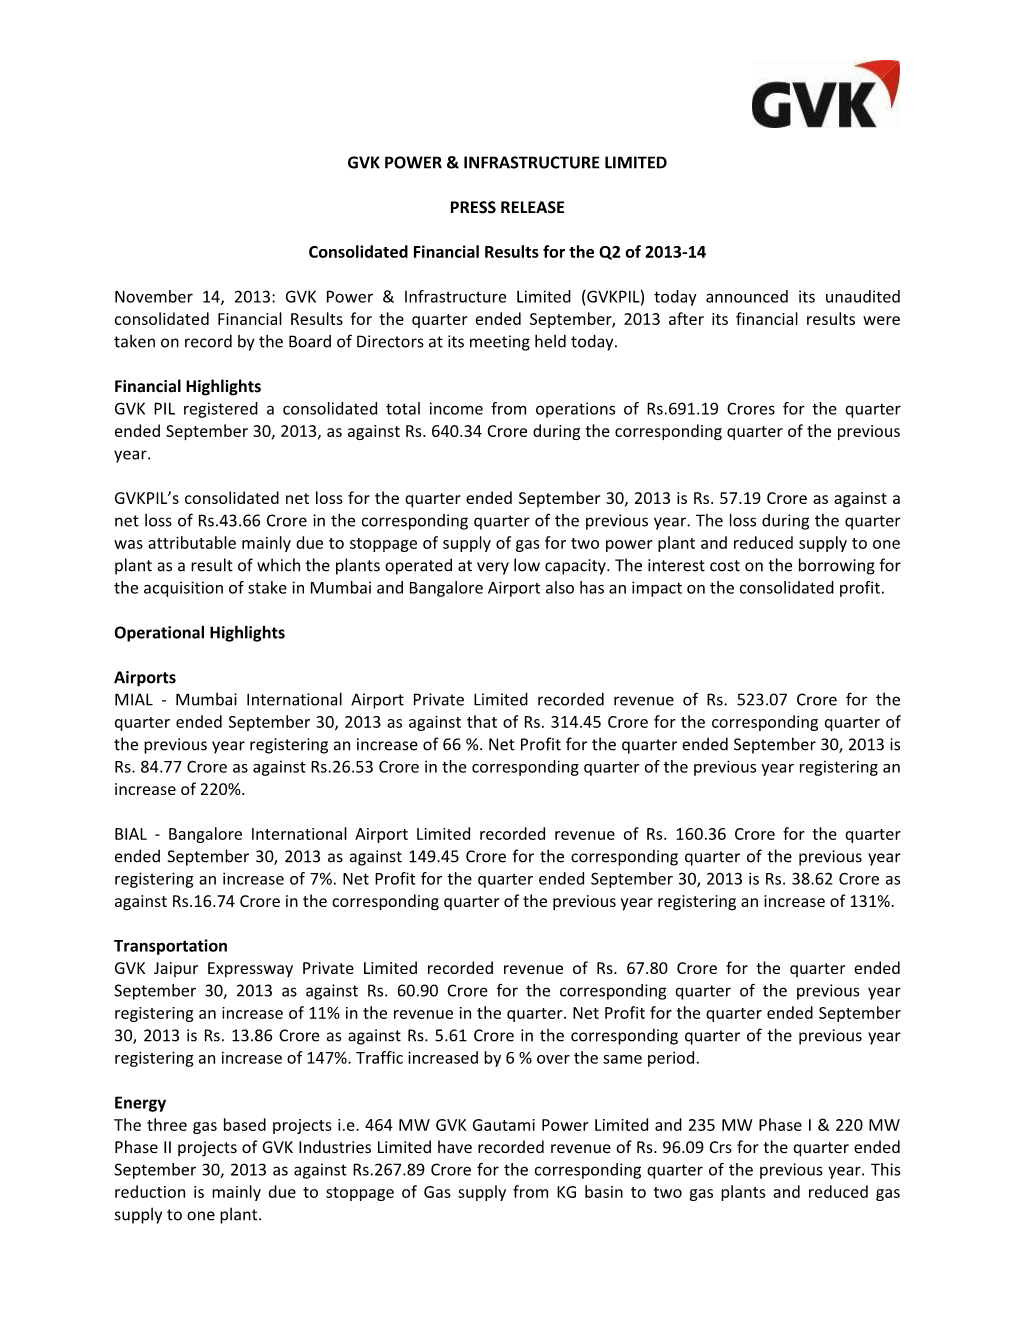 Gvk Power & Infrastructure Limited Press Release